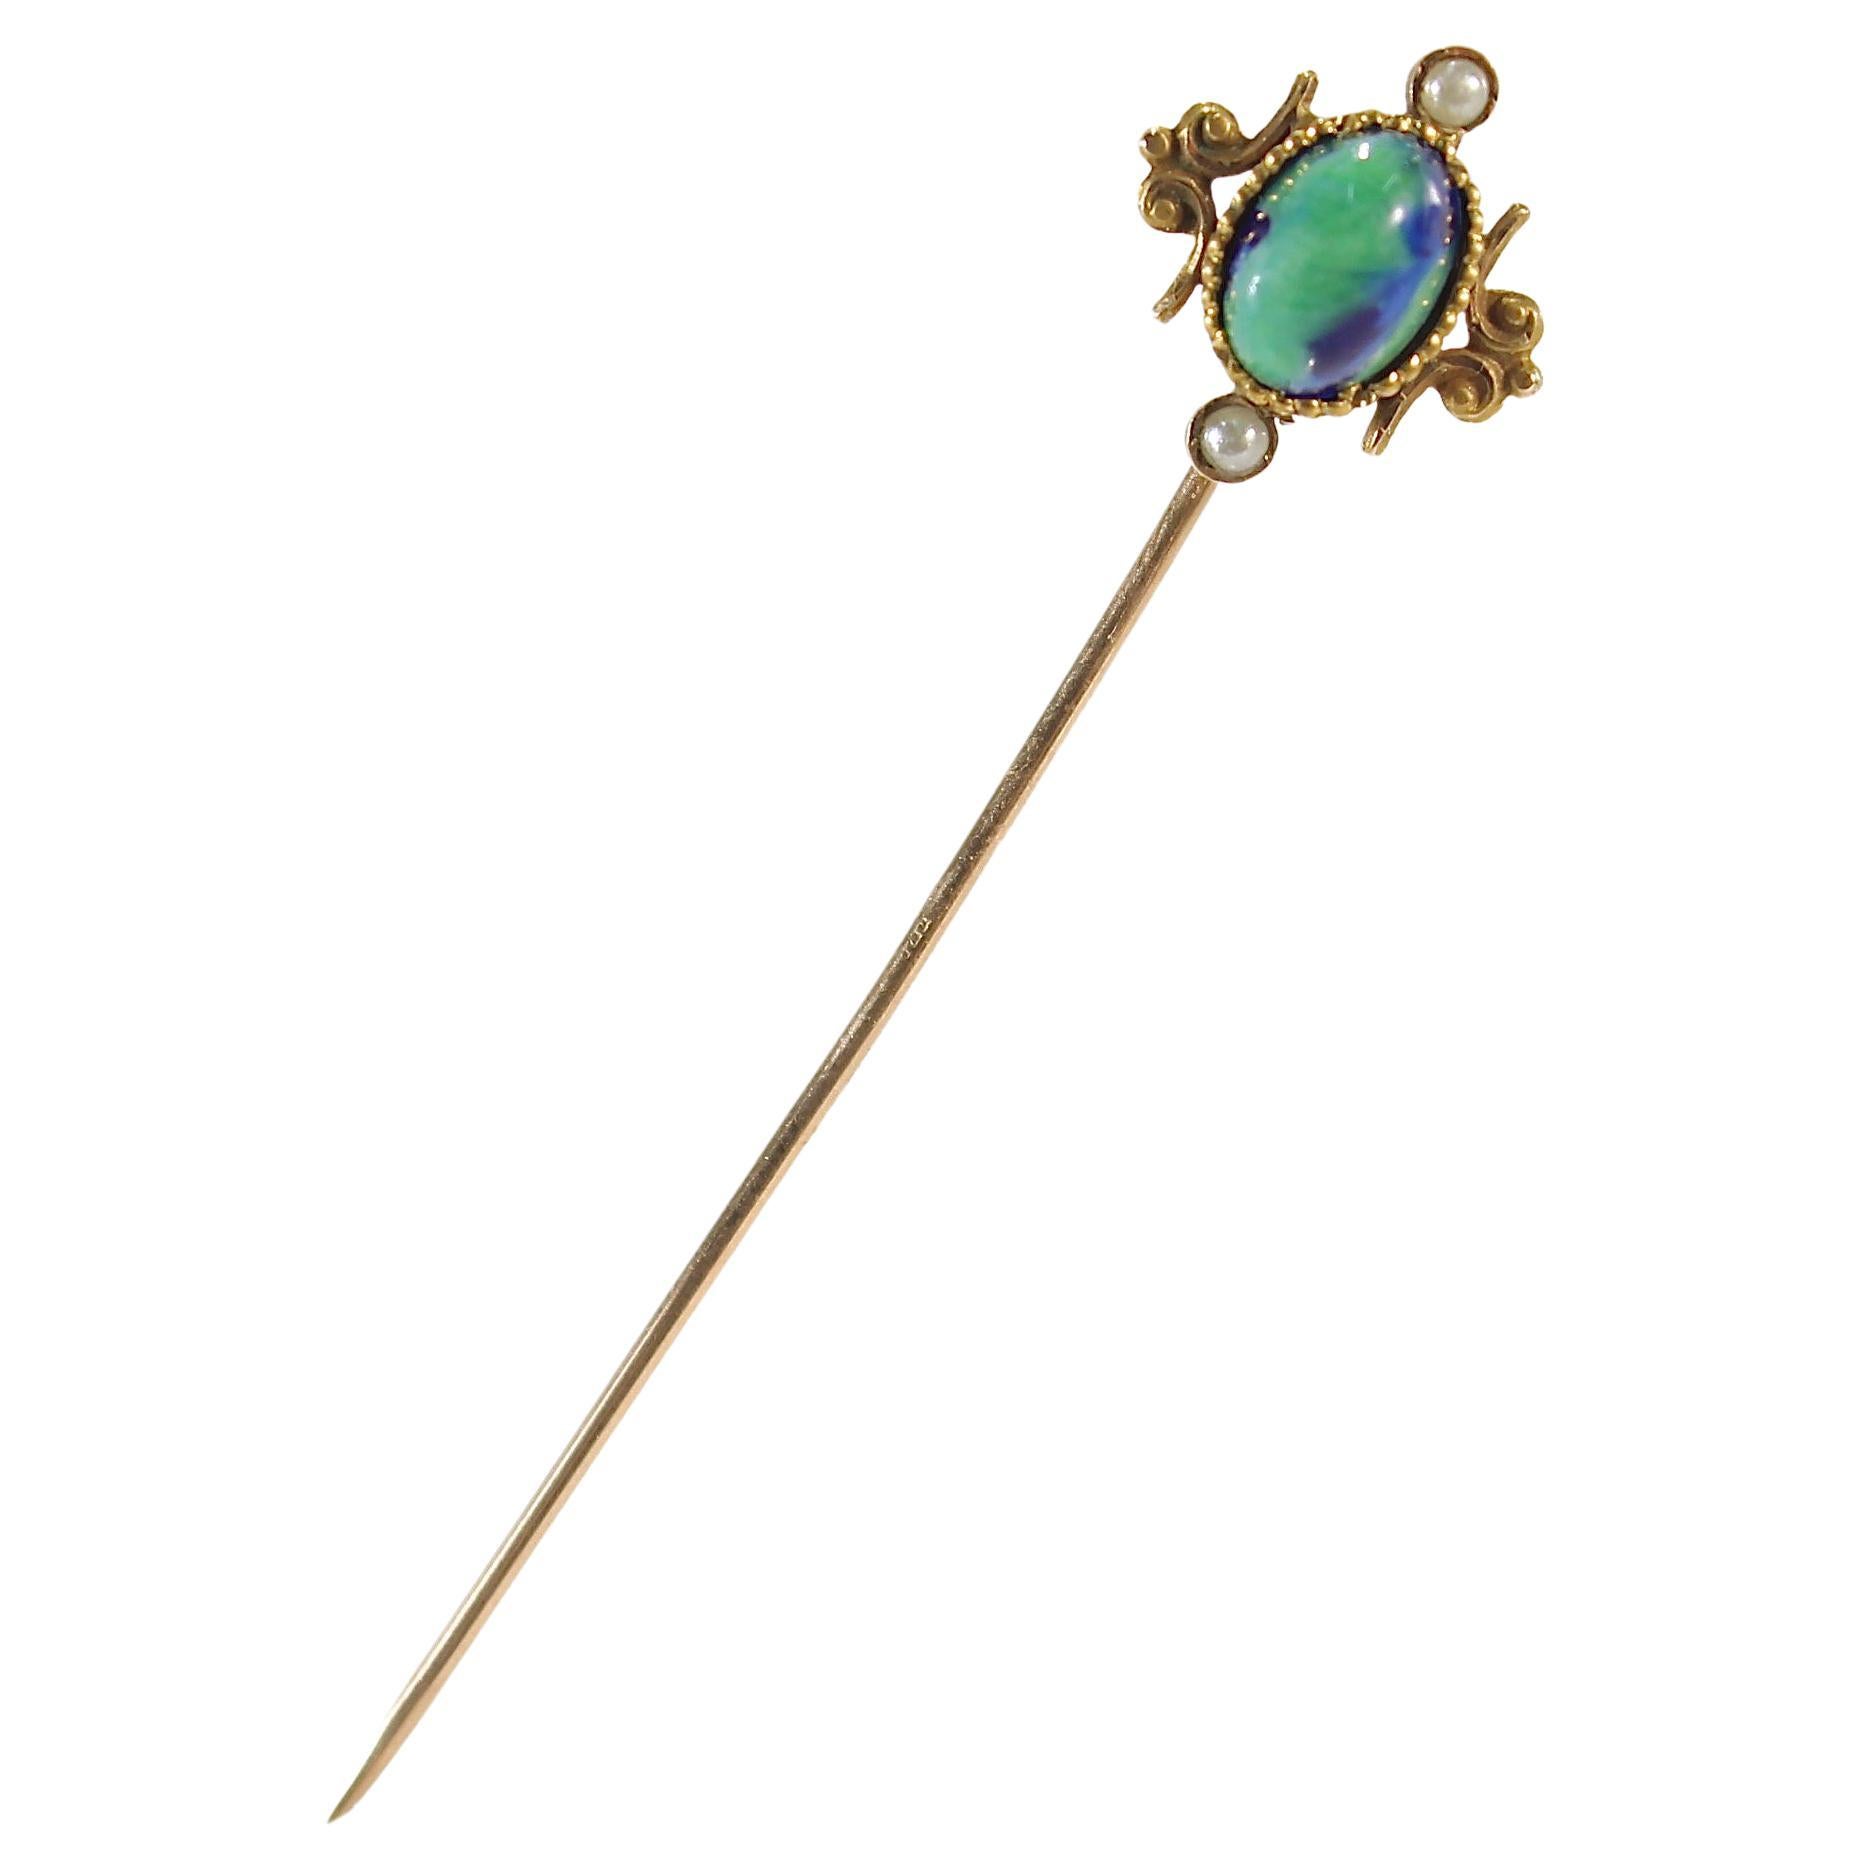 Antique Etruscan Revival Style Gold, Agate Glass & Seed Pearl Stick Pin